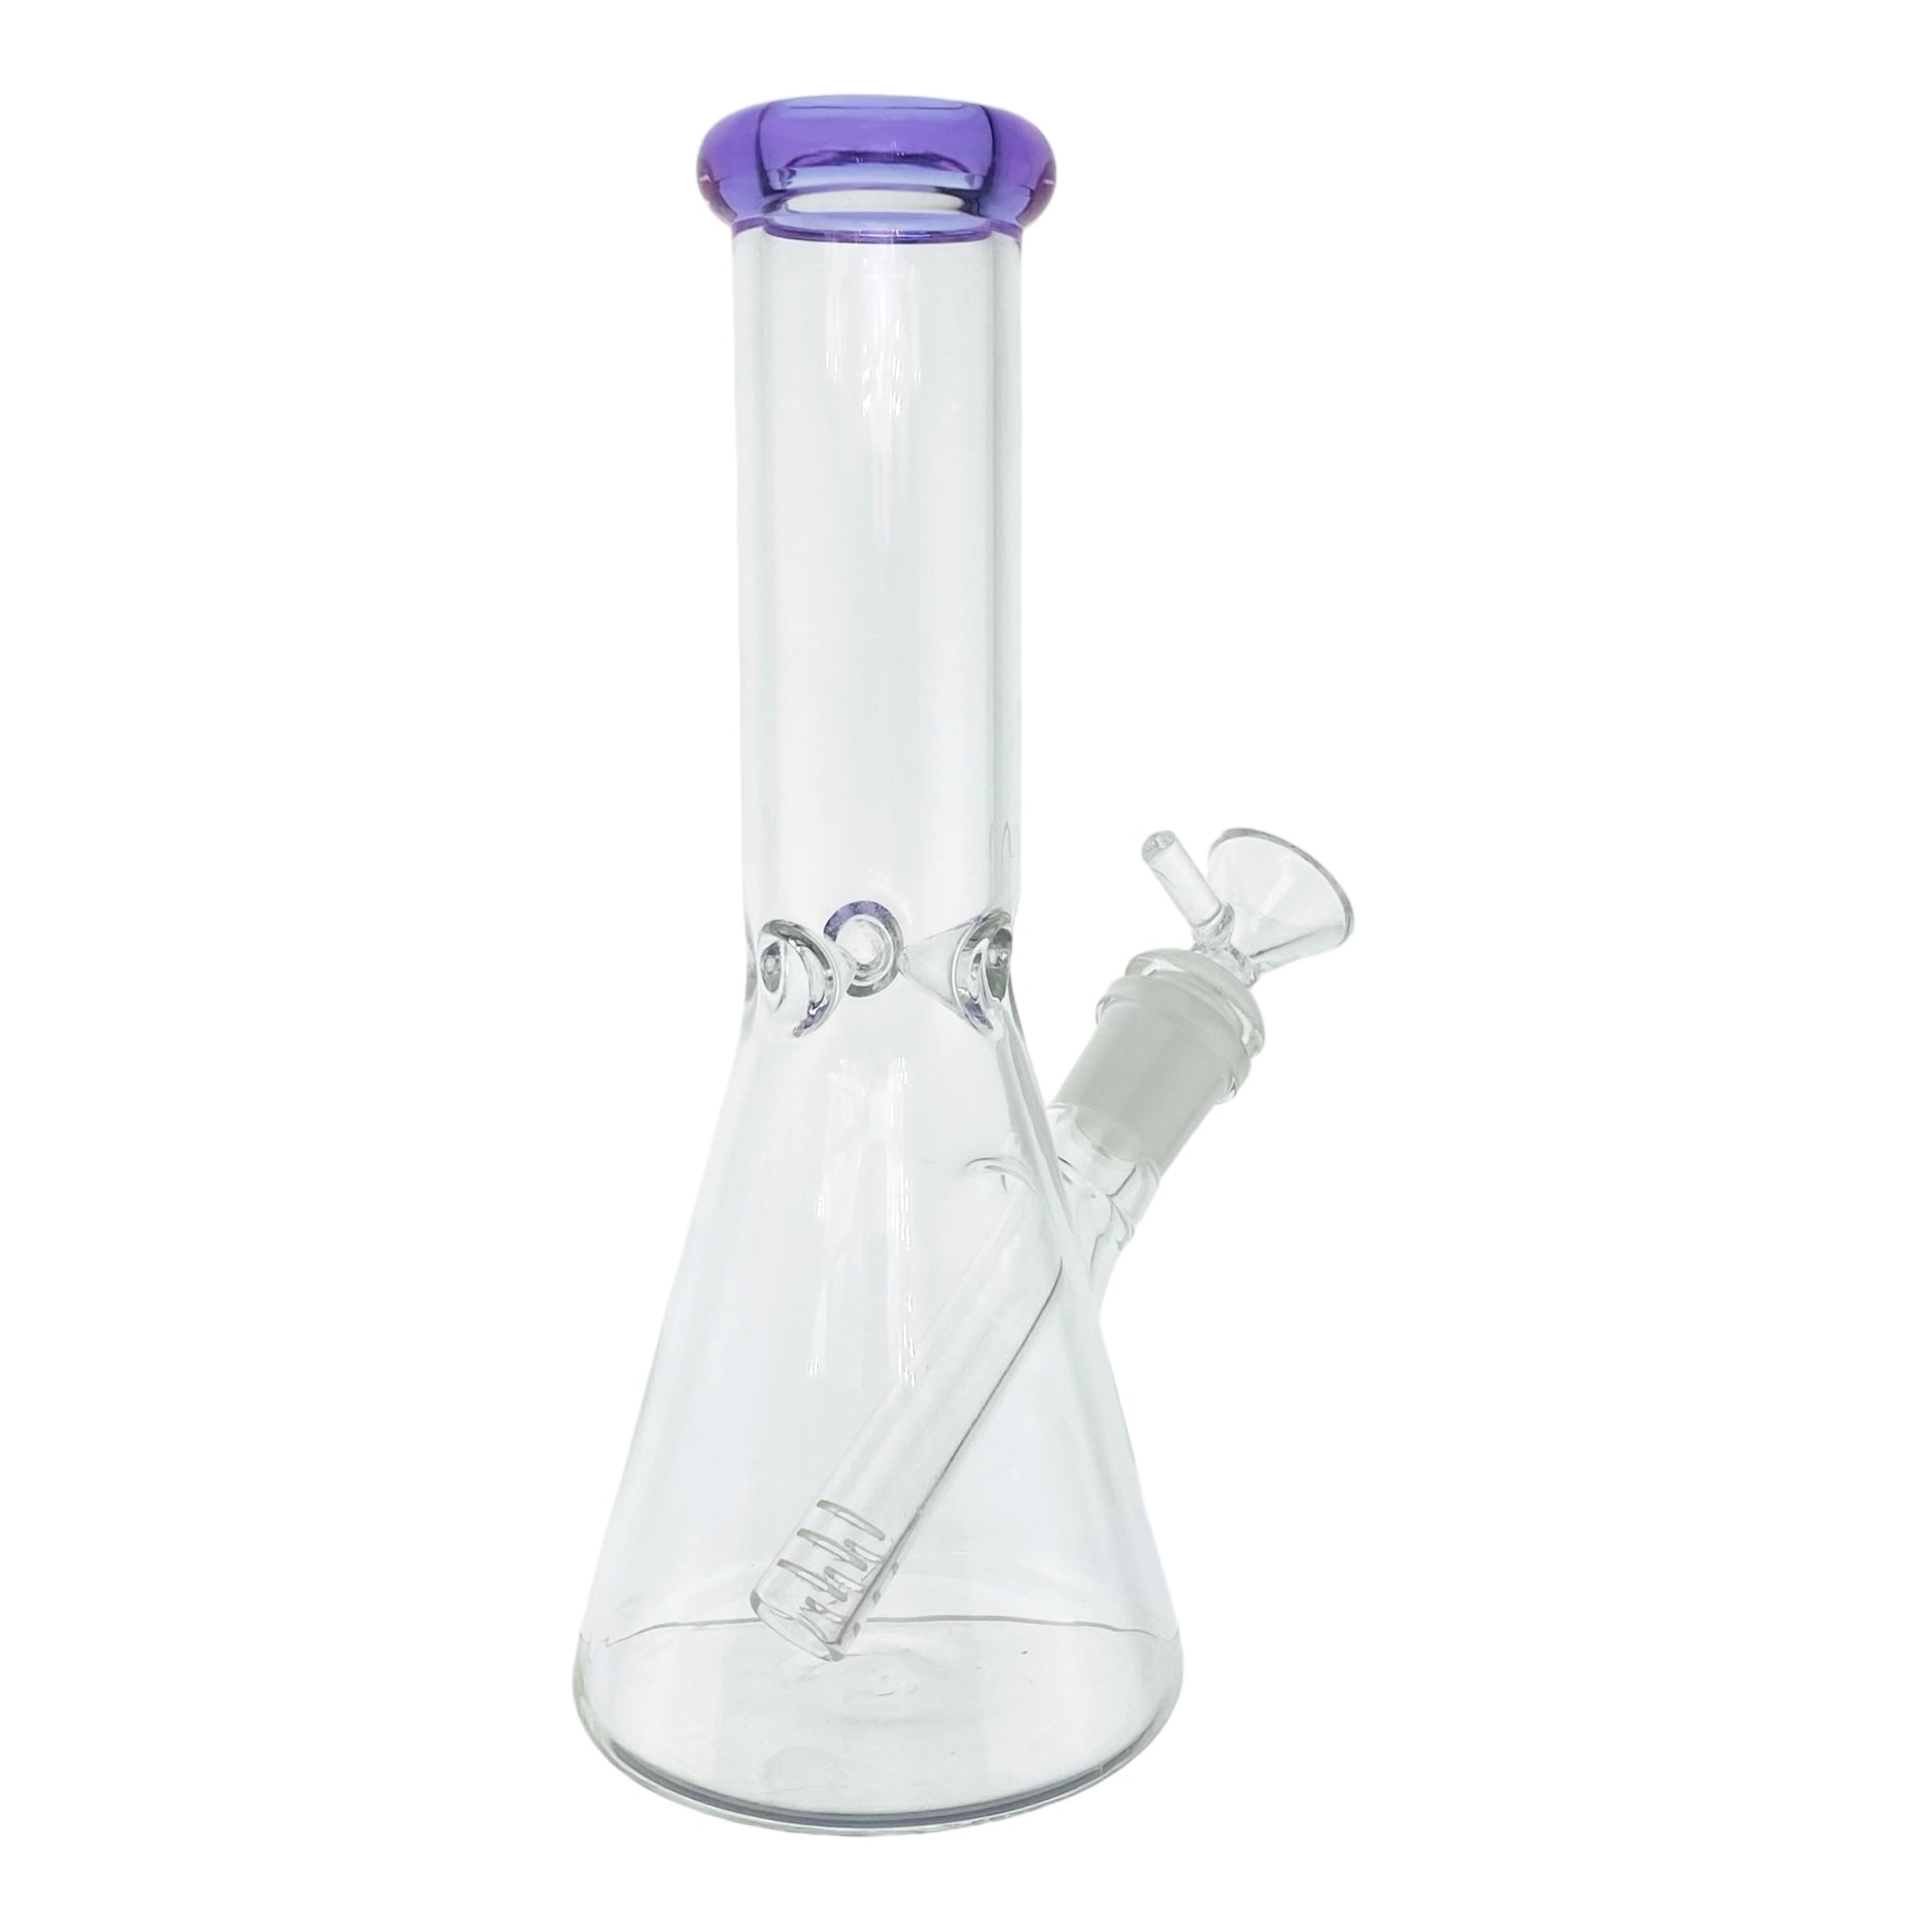 cute girly small glass bong with purple mouthpiece